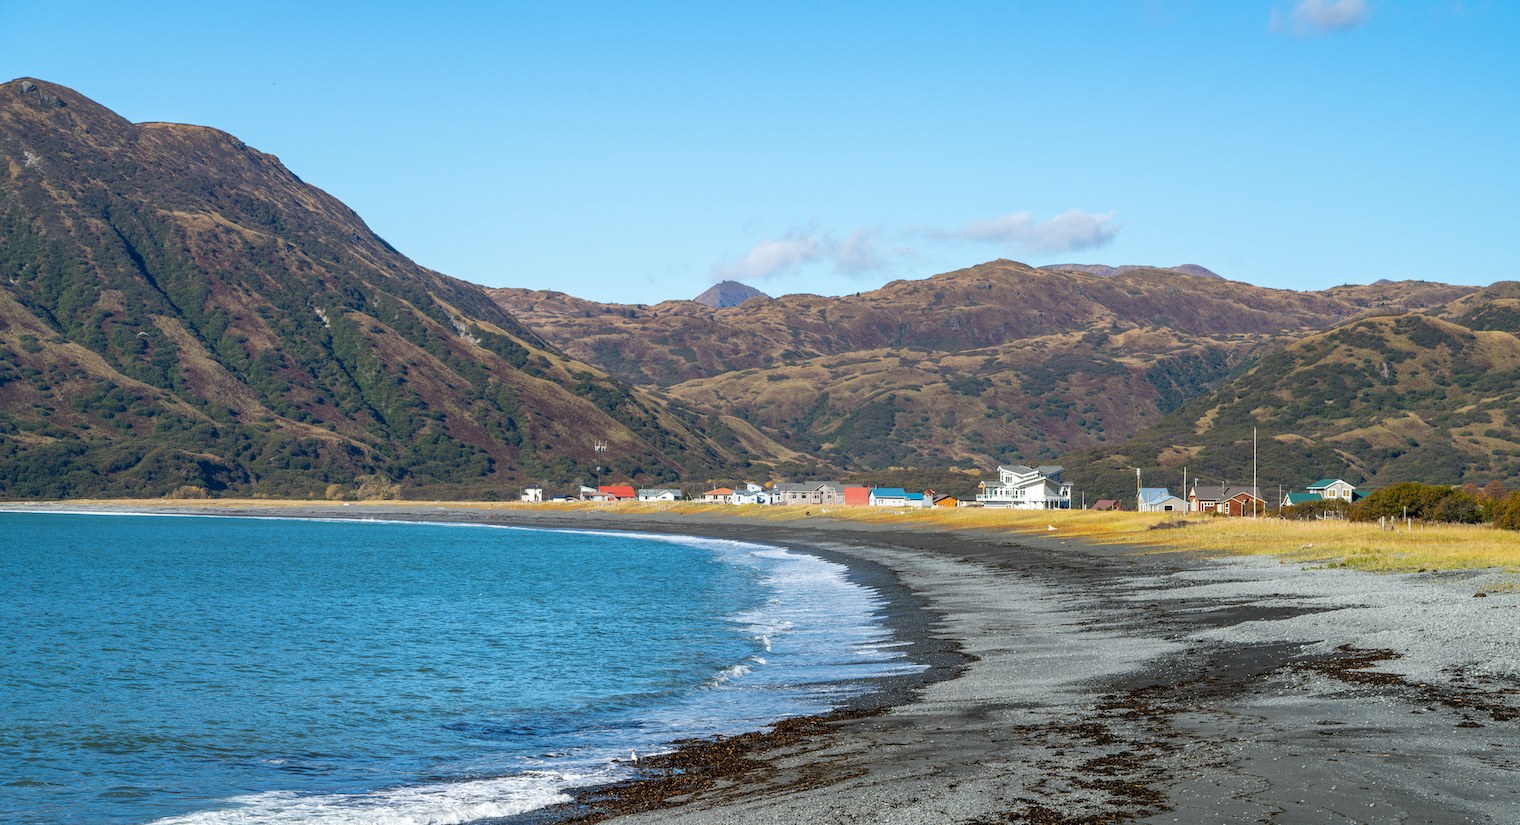 Blue ocean bay with small waves lapping at gravel beach and a small community nestled beneath mountains